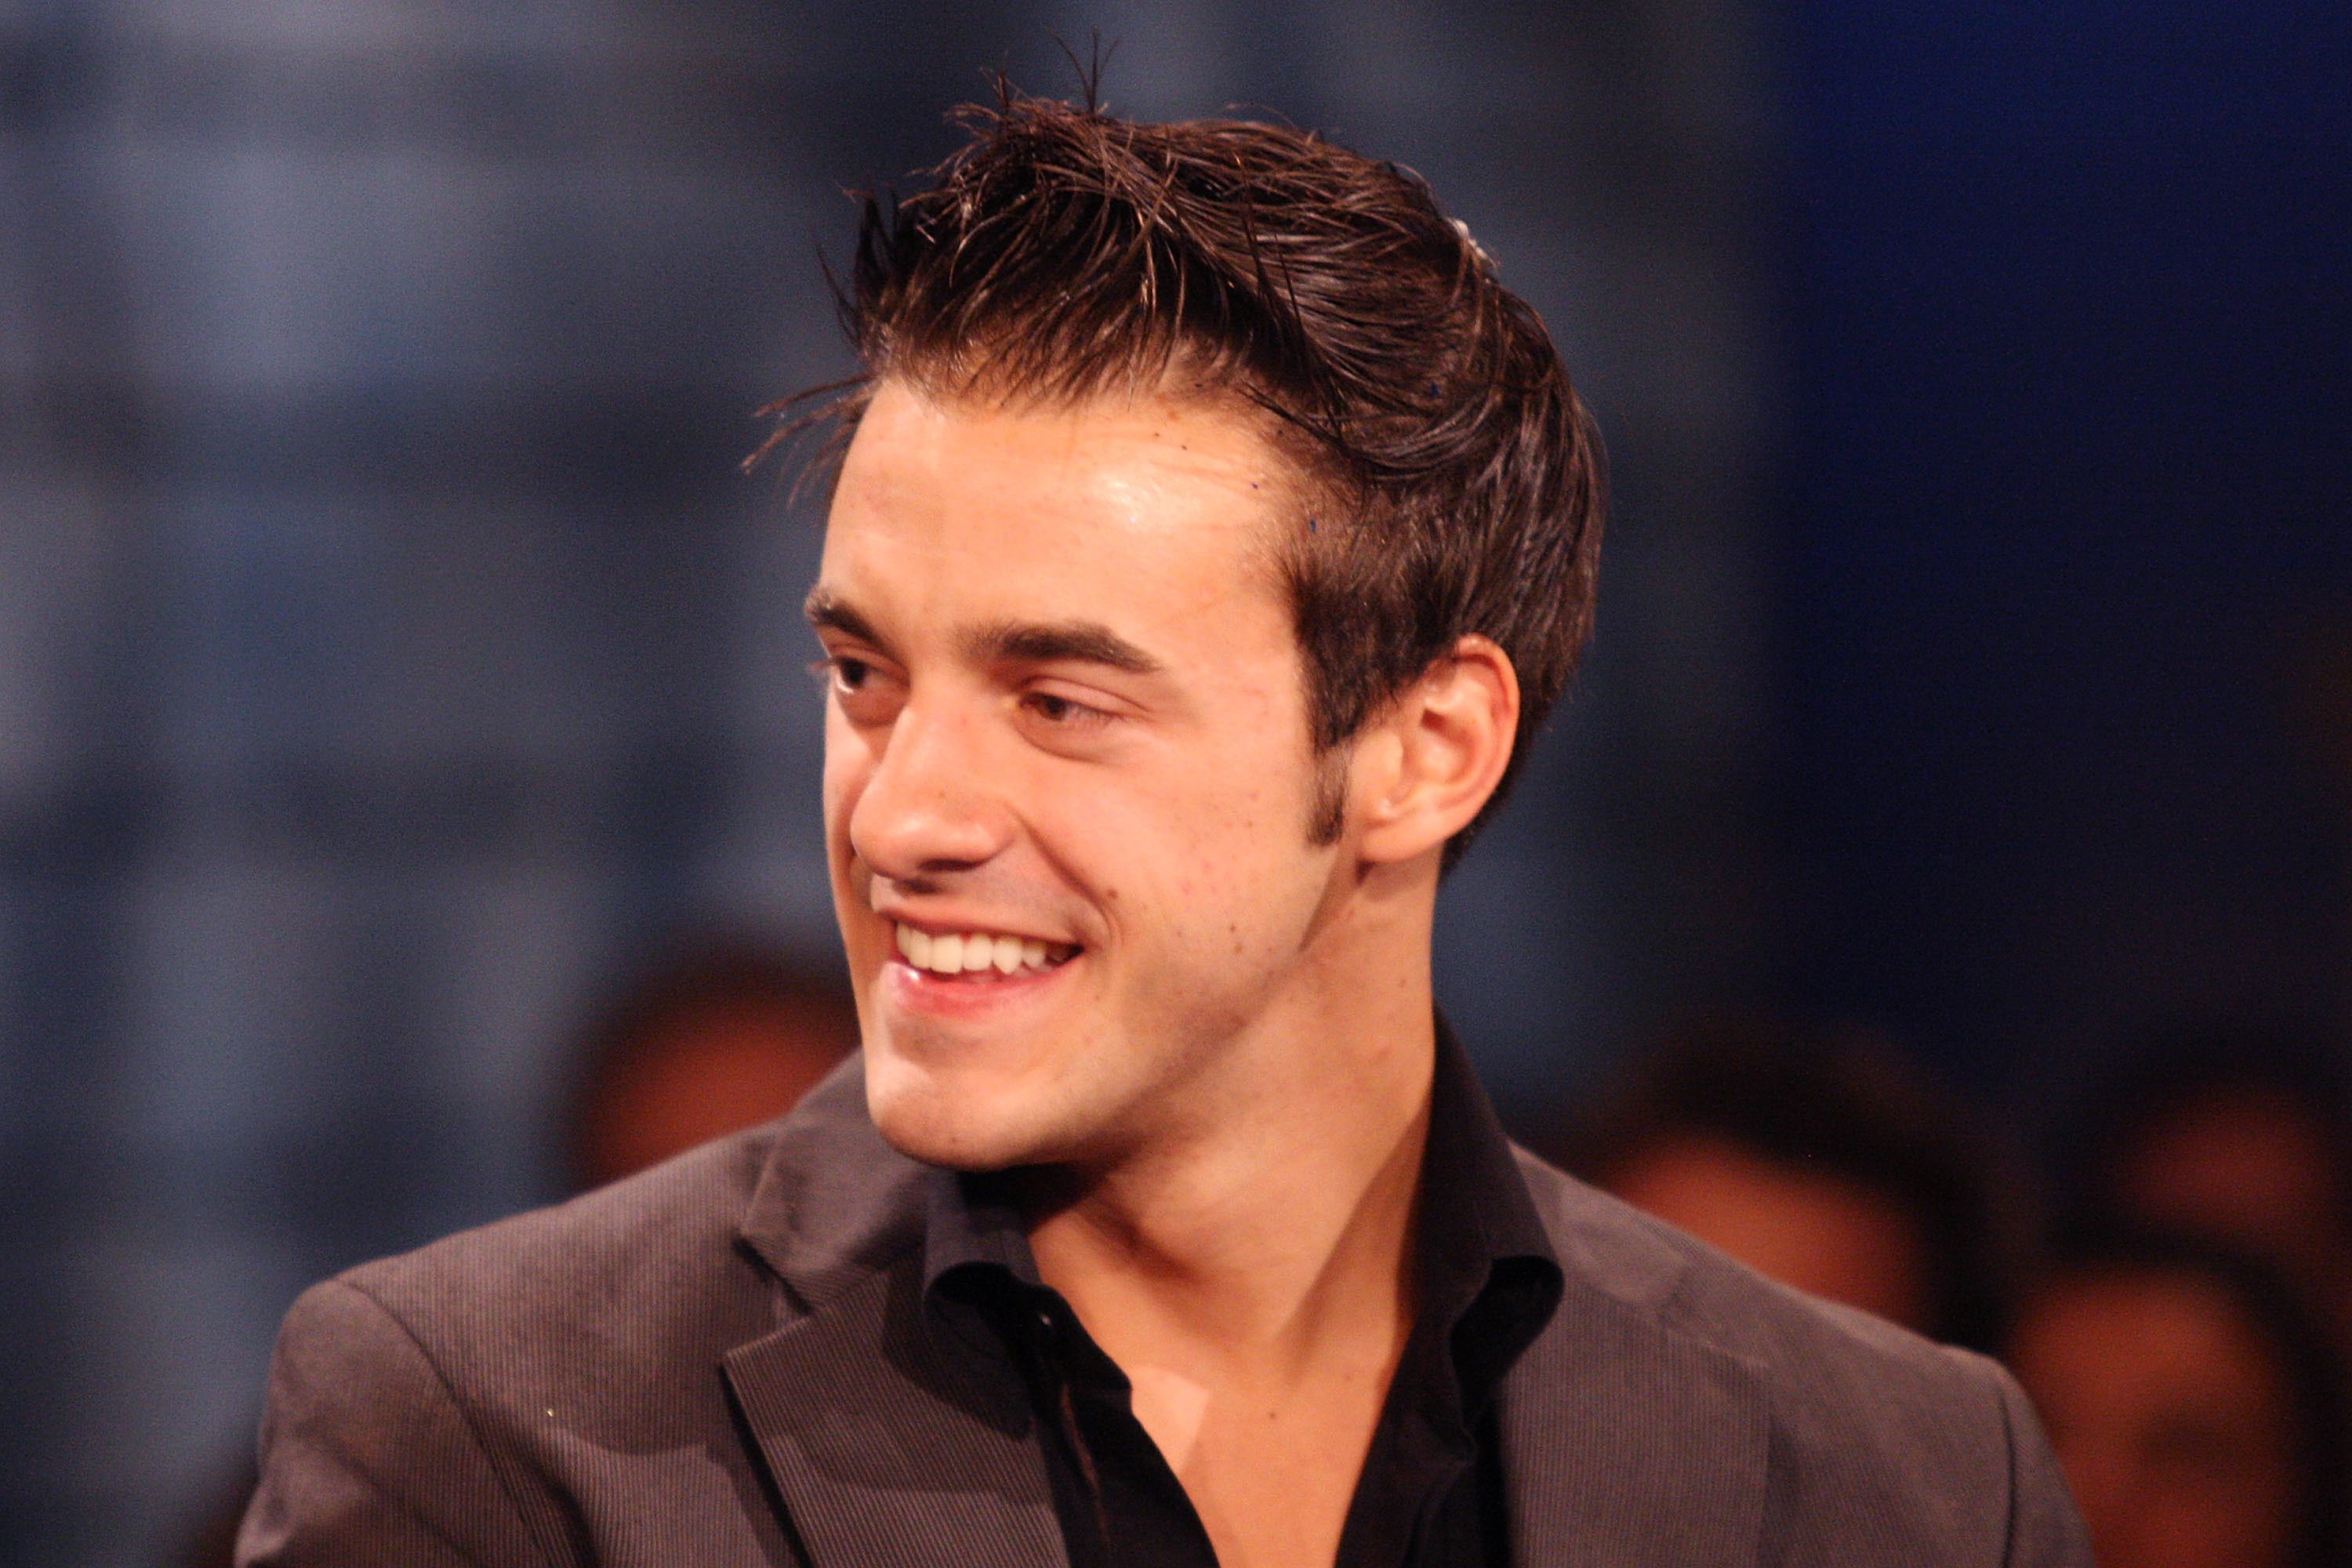 Dan Gheesling, who won 'Big Brother' Season 10, wears a gray suit over a black button-up shirt.